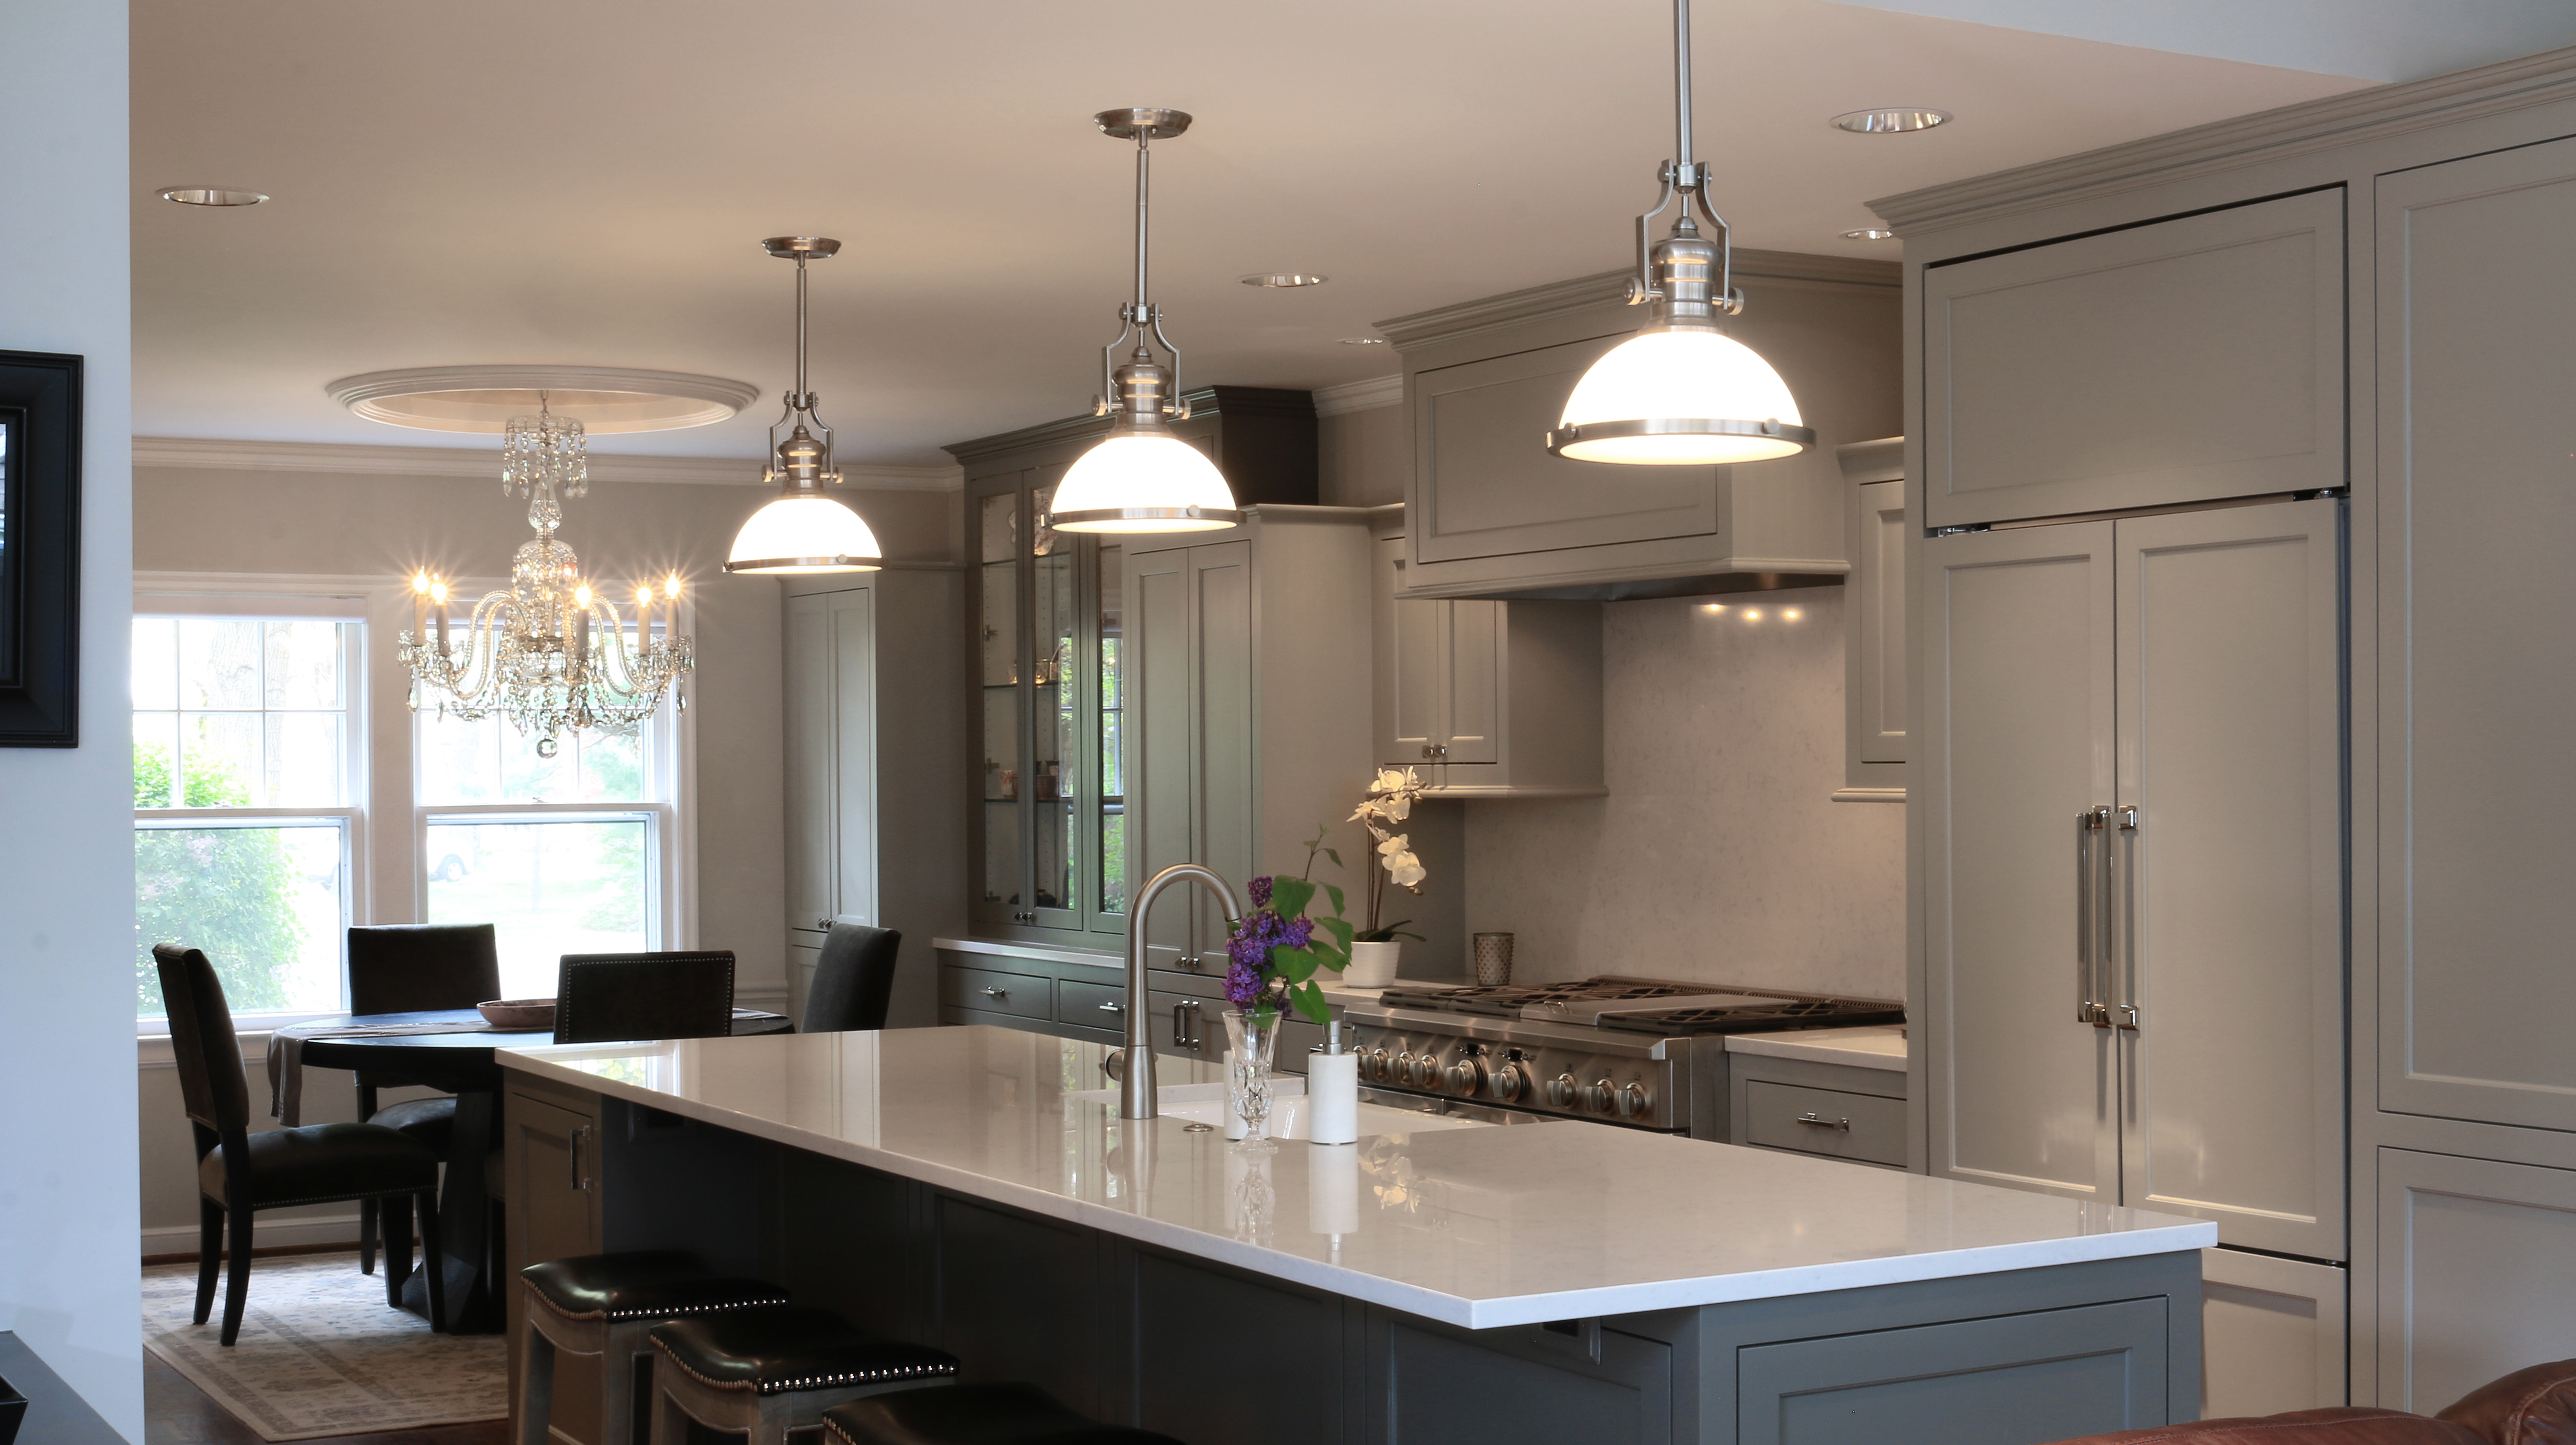 Kitchen island in Leawood, Kansas Cape Cod style home